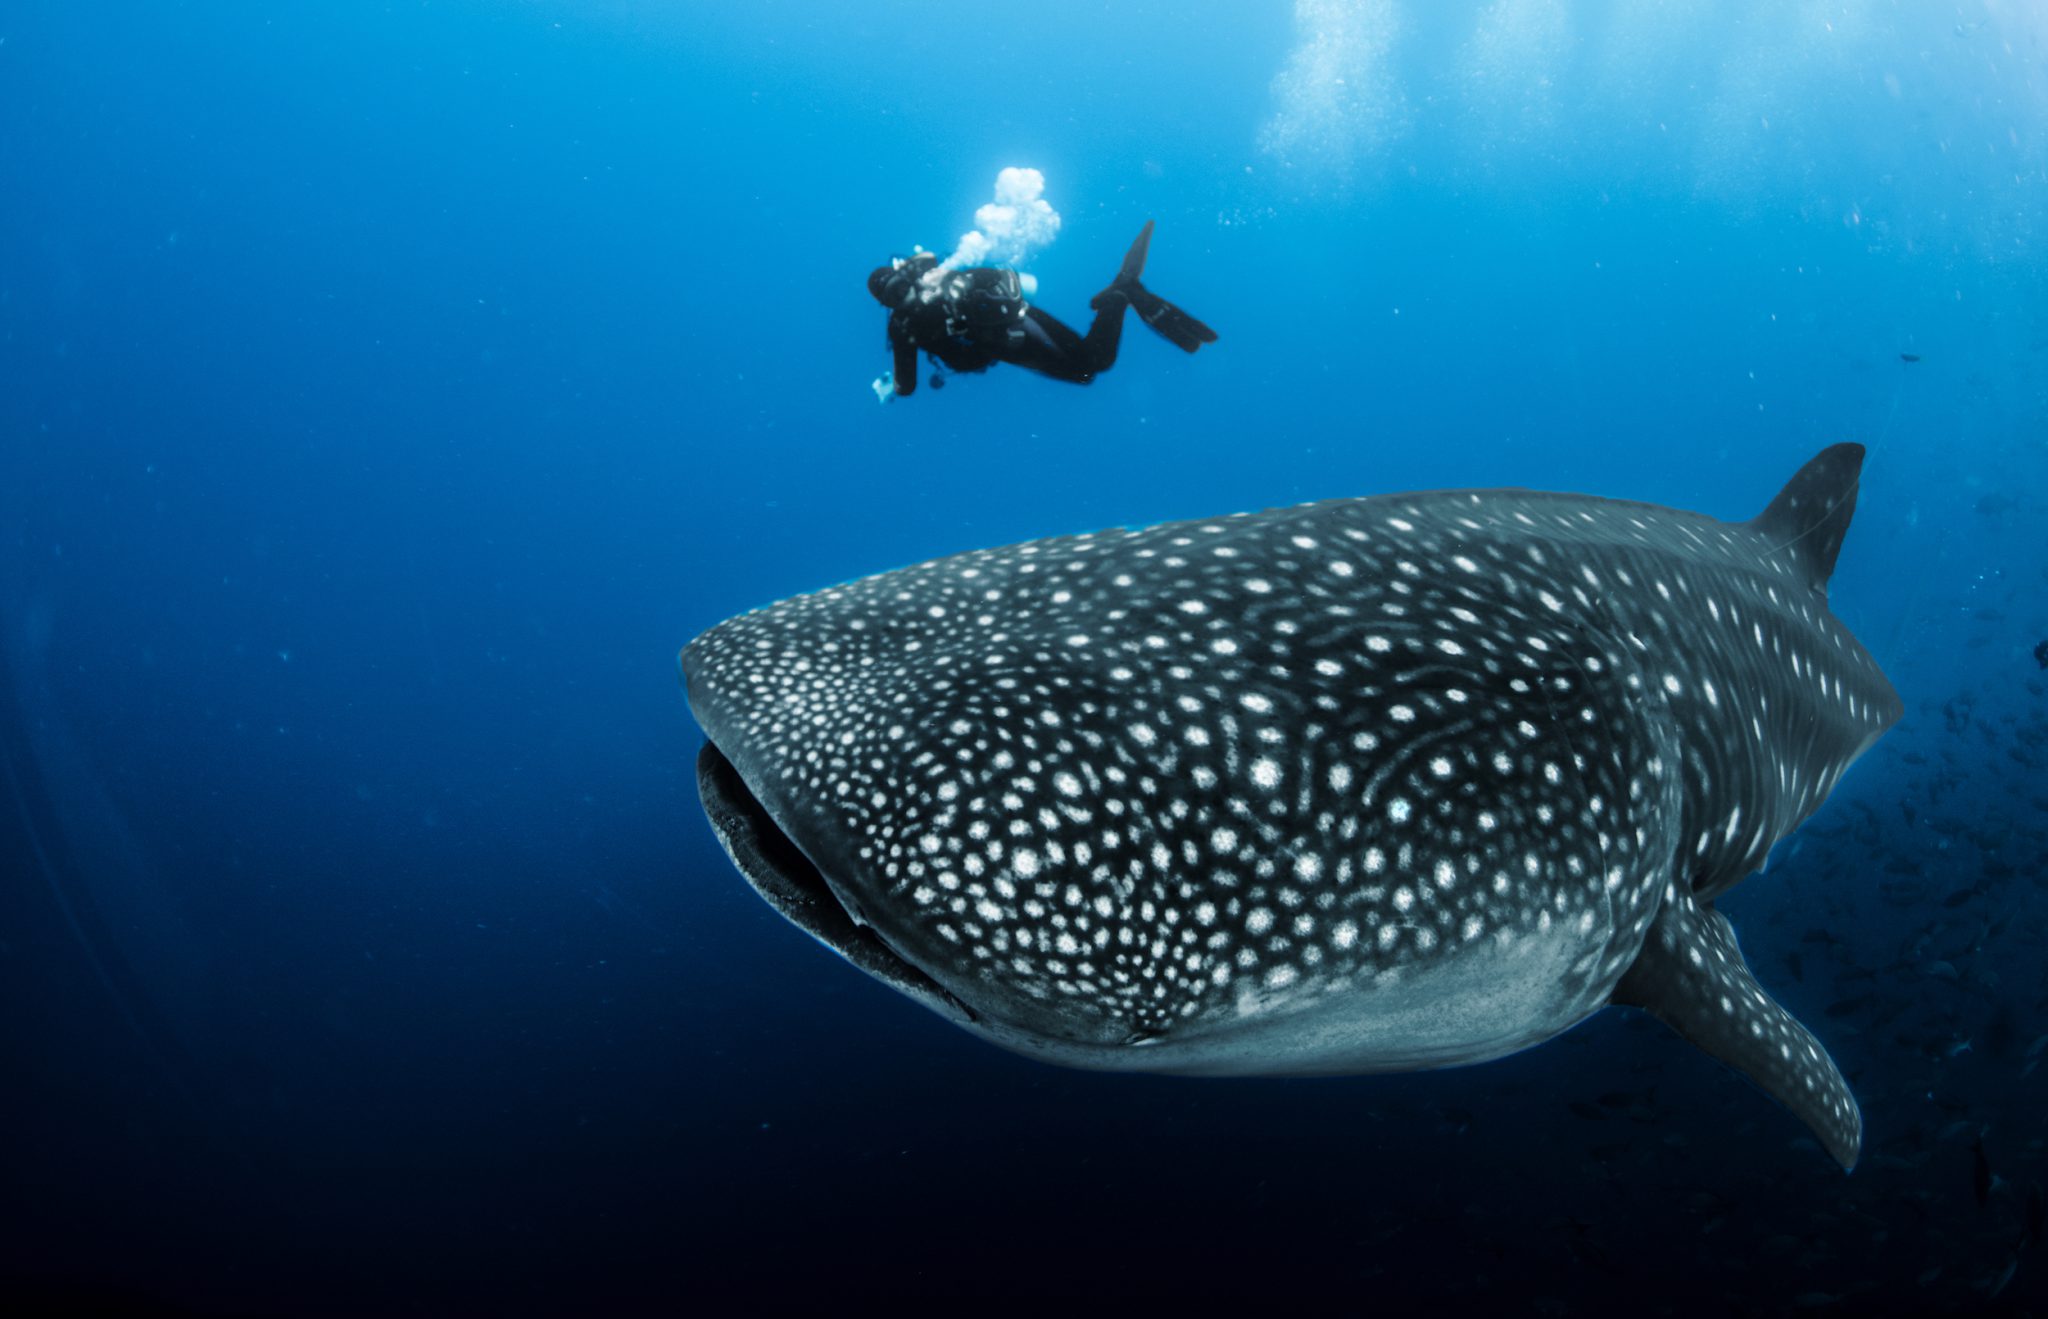 A scuba diver swims next to a giant whale shark in the Galapagos Islands, one of the best liveaboard locations for megafauna